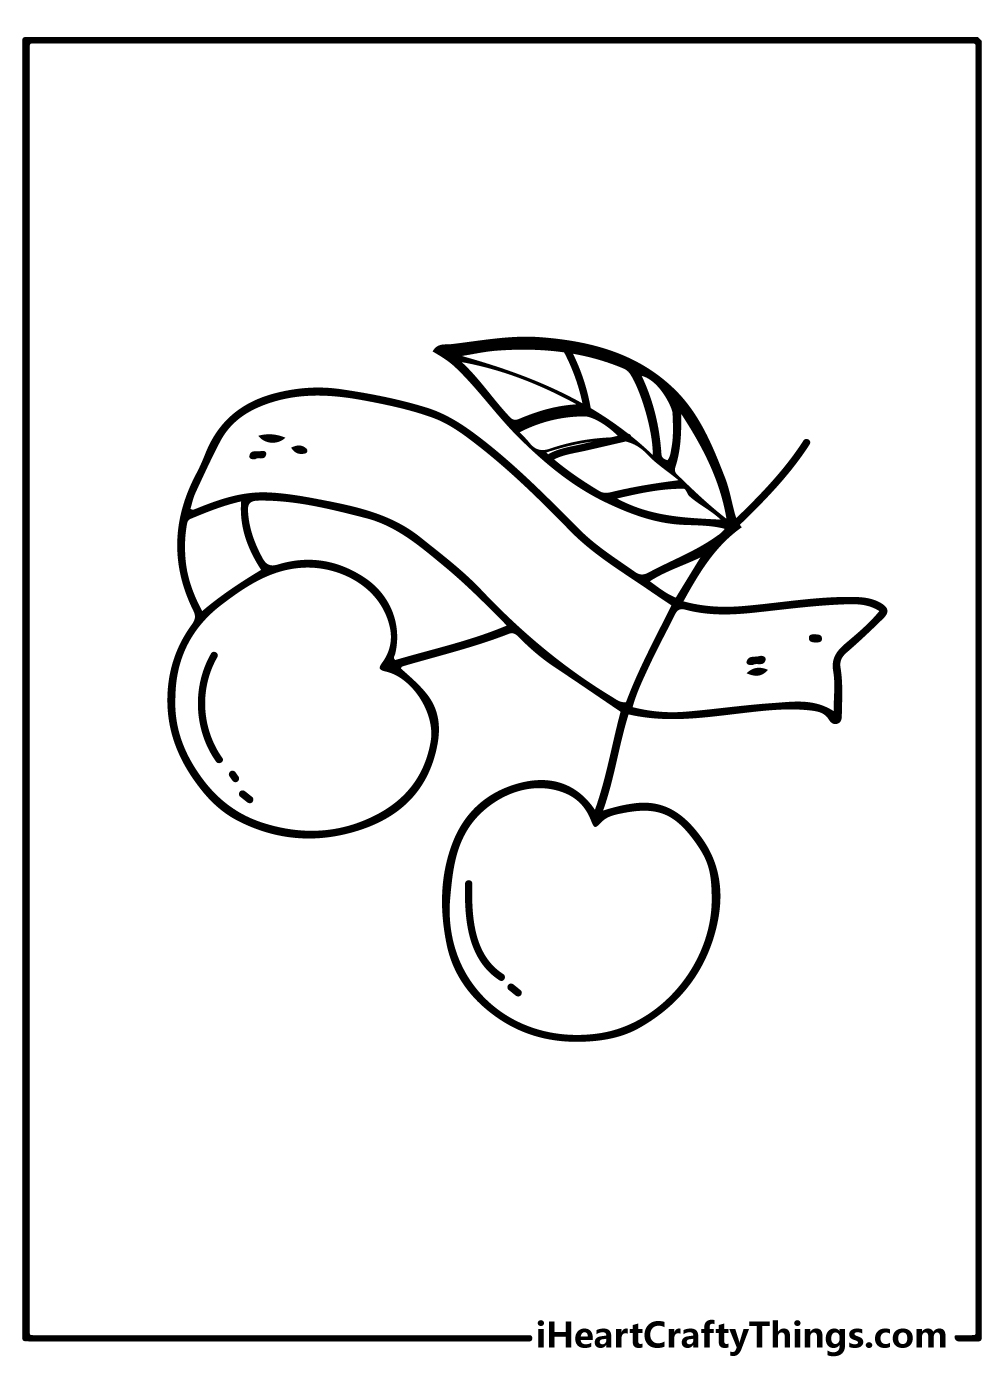 Tattoos Coloring Sheet for children free download